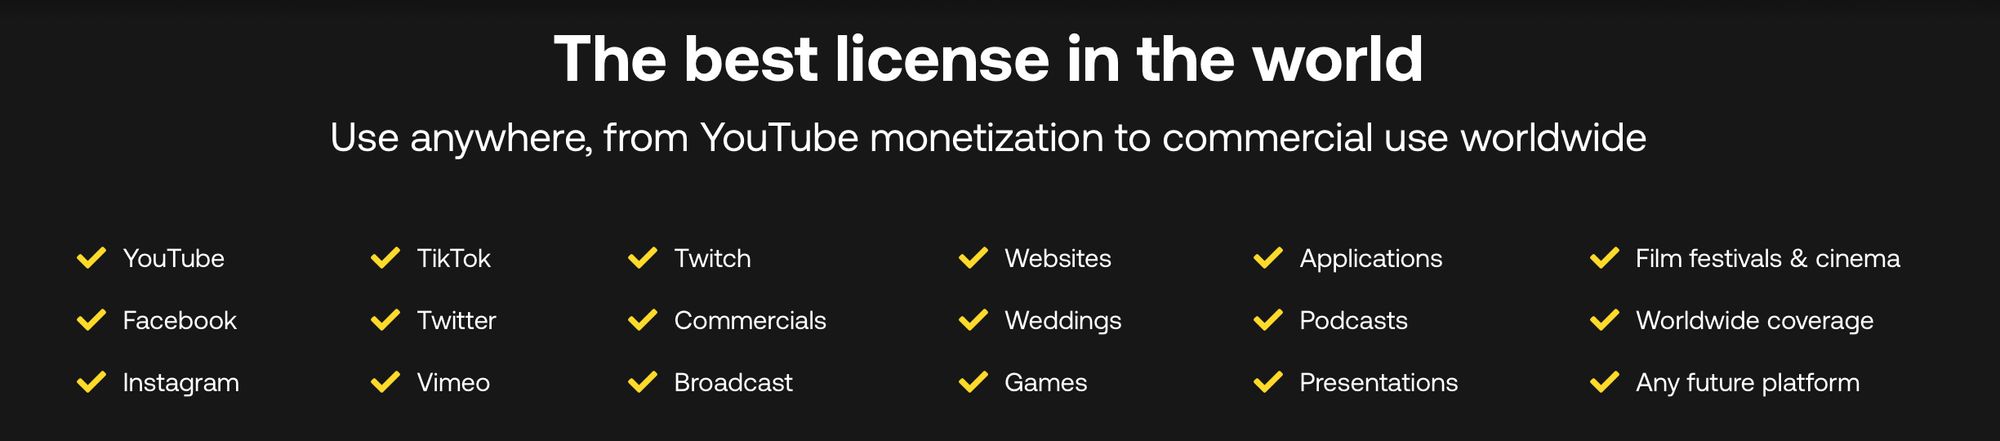 Subscription music licensing service Artlist for royalty-free music used in video content on social media